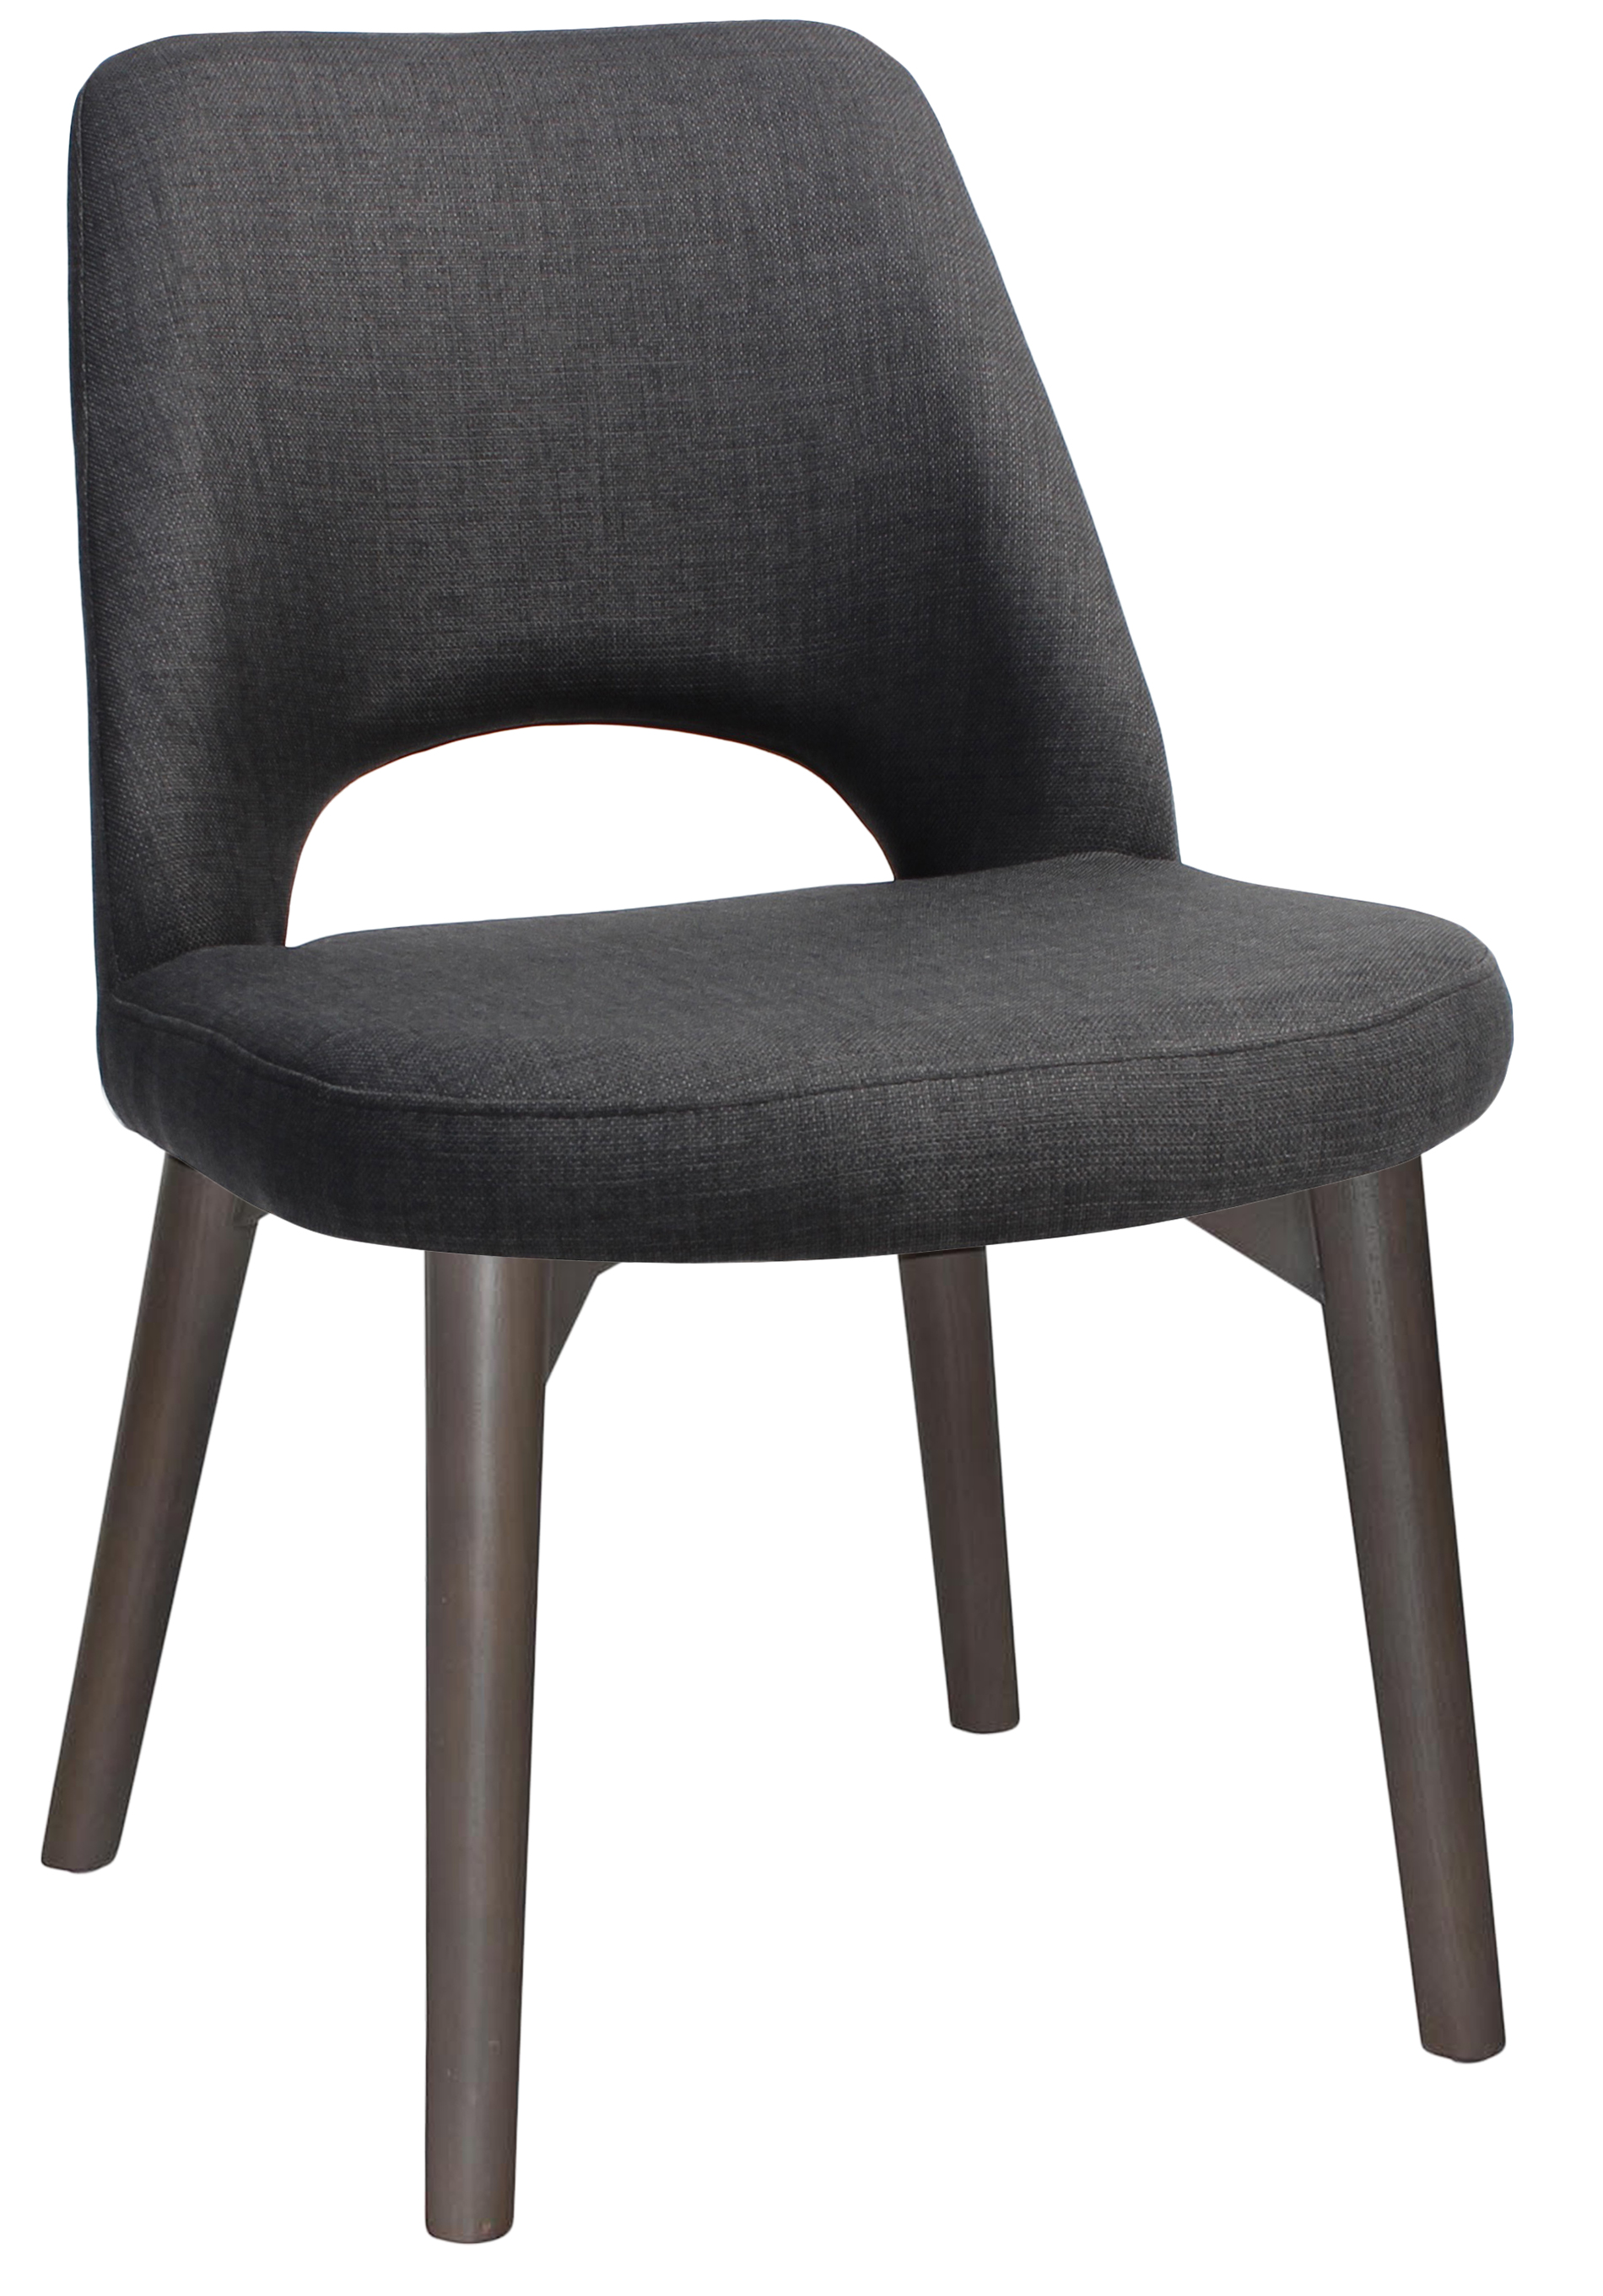 CHAIR ALBURY TIMBER OLIVEGREY + FABRIC CHARCOAL